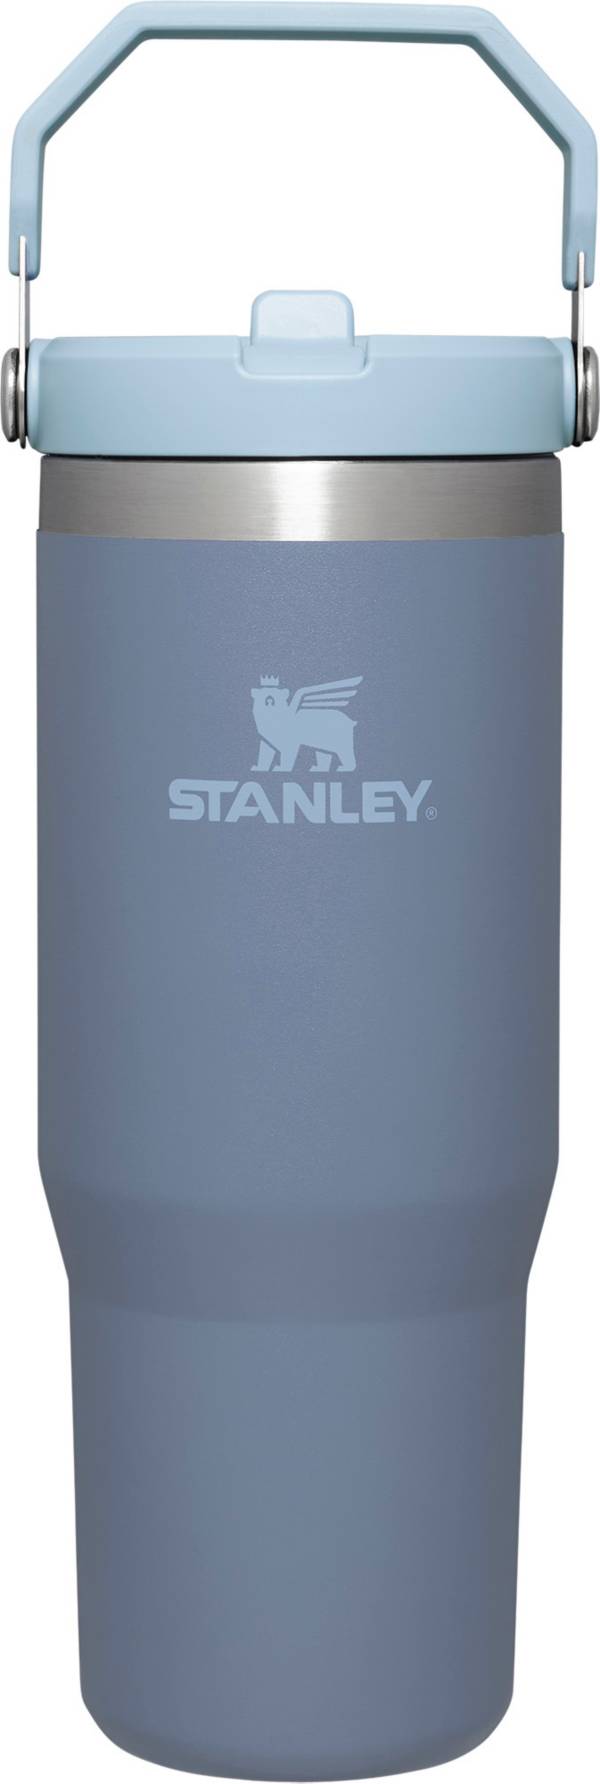 Stanley 30 Oz. IceFlow Tumbler with Flip Straw product image